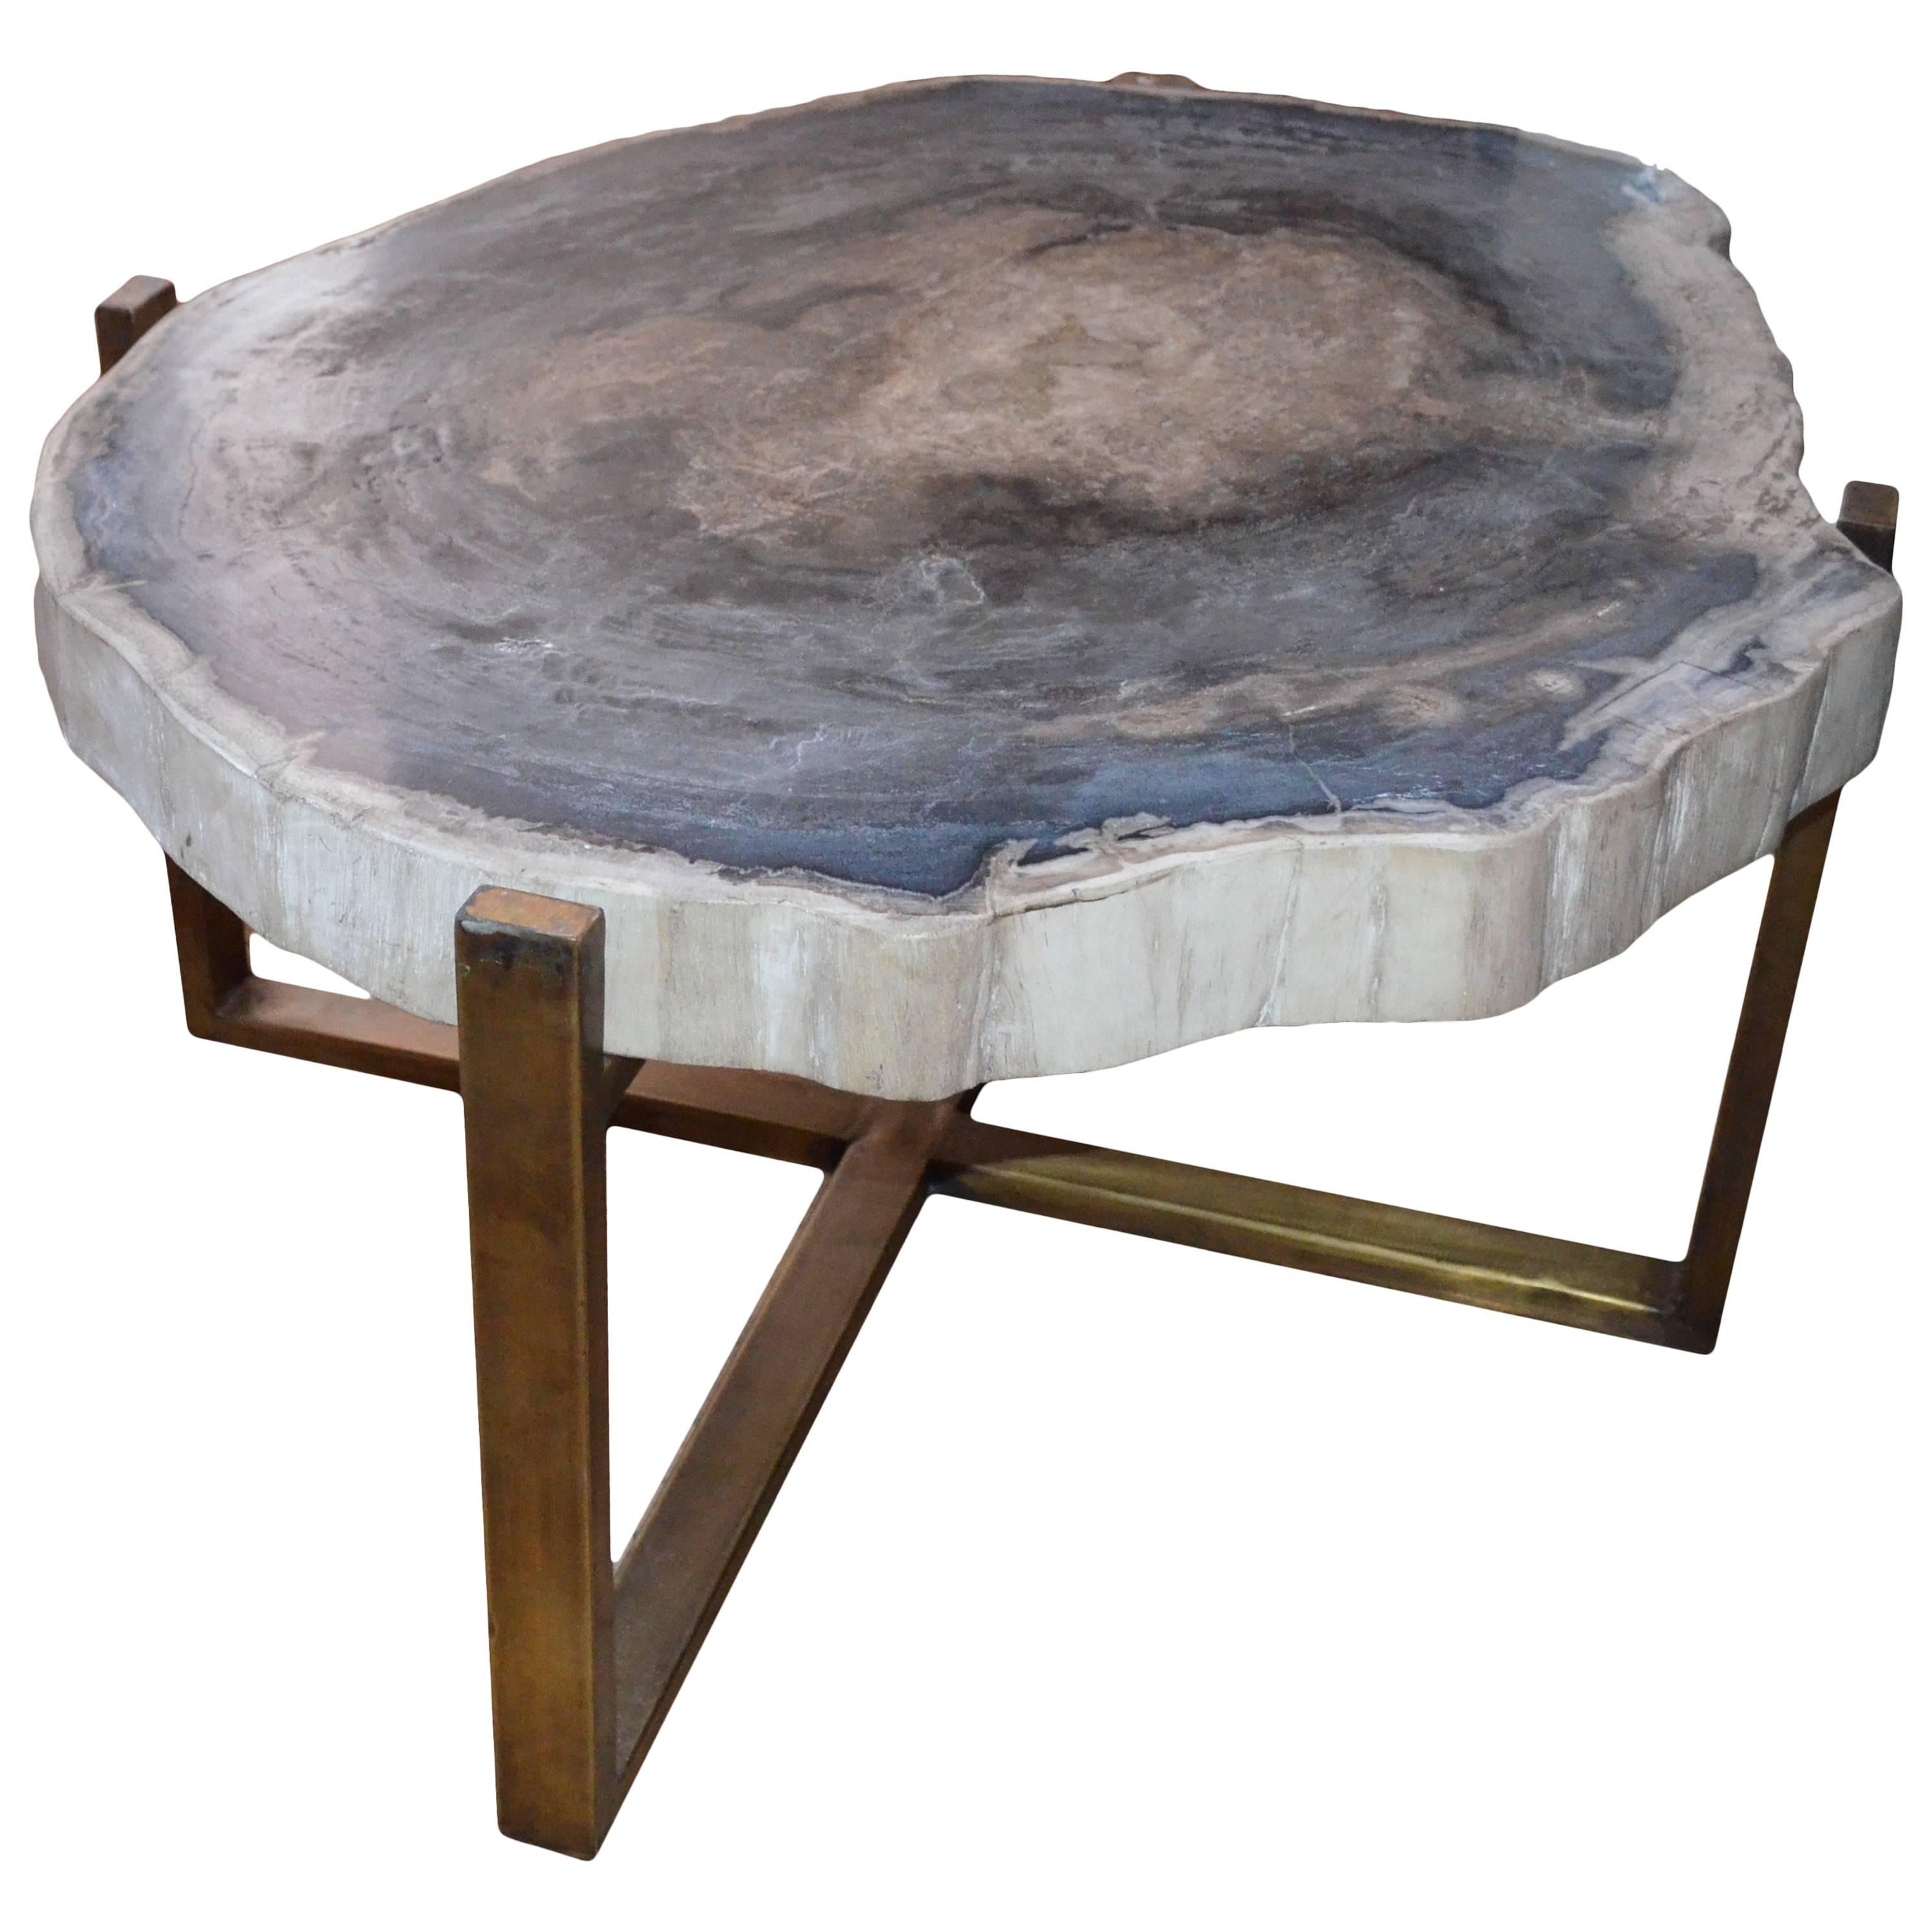 Grey and Beige Petrified Wood Slab Table